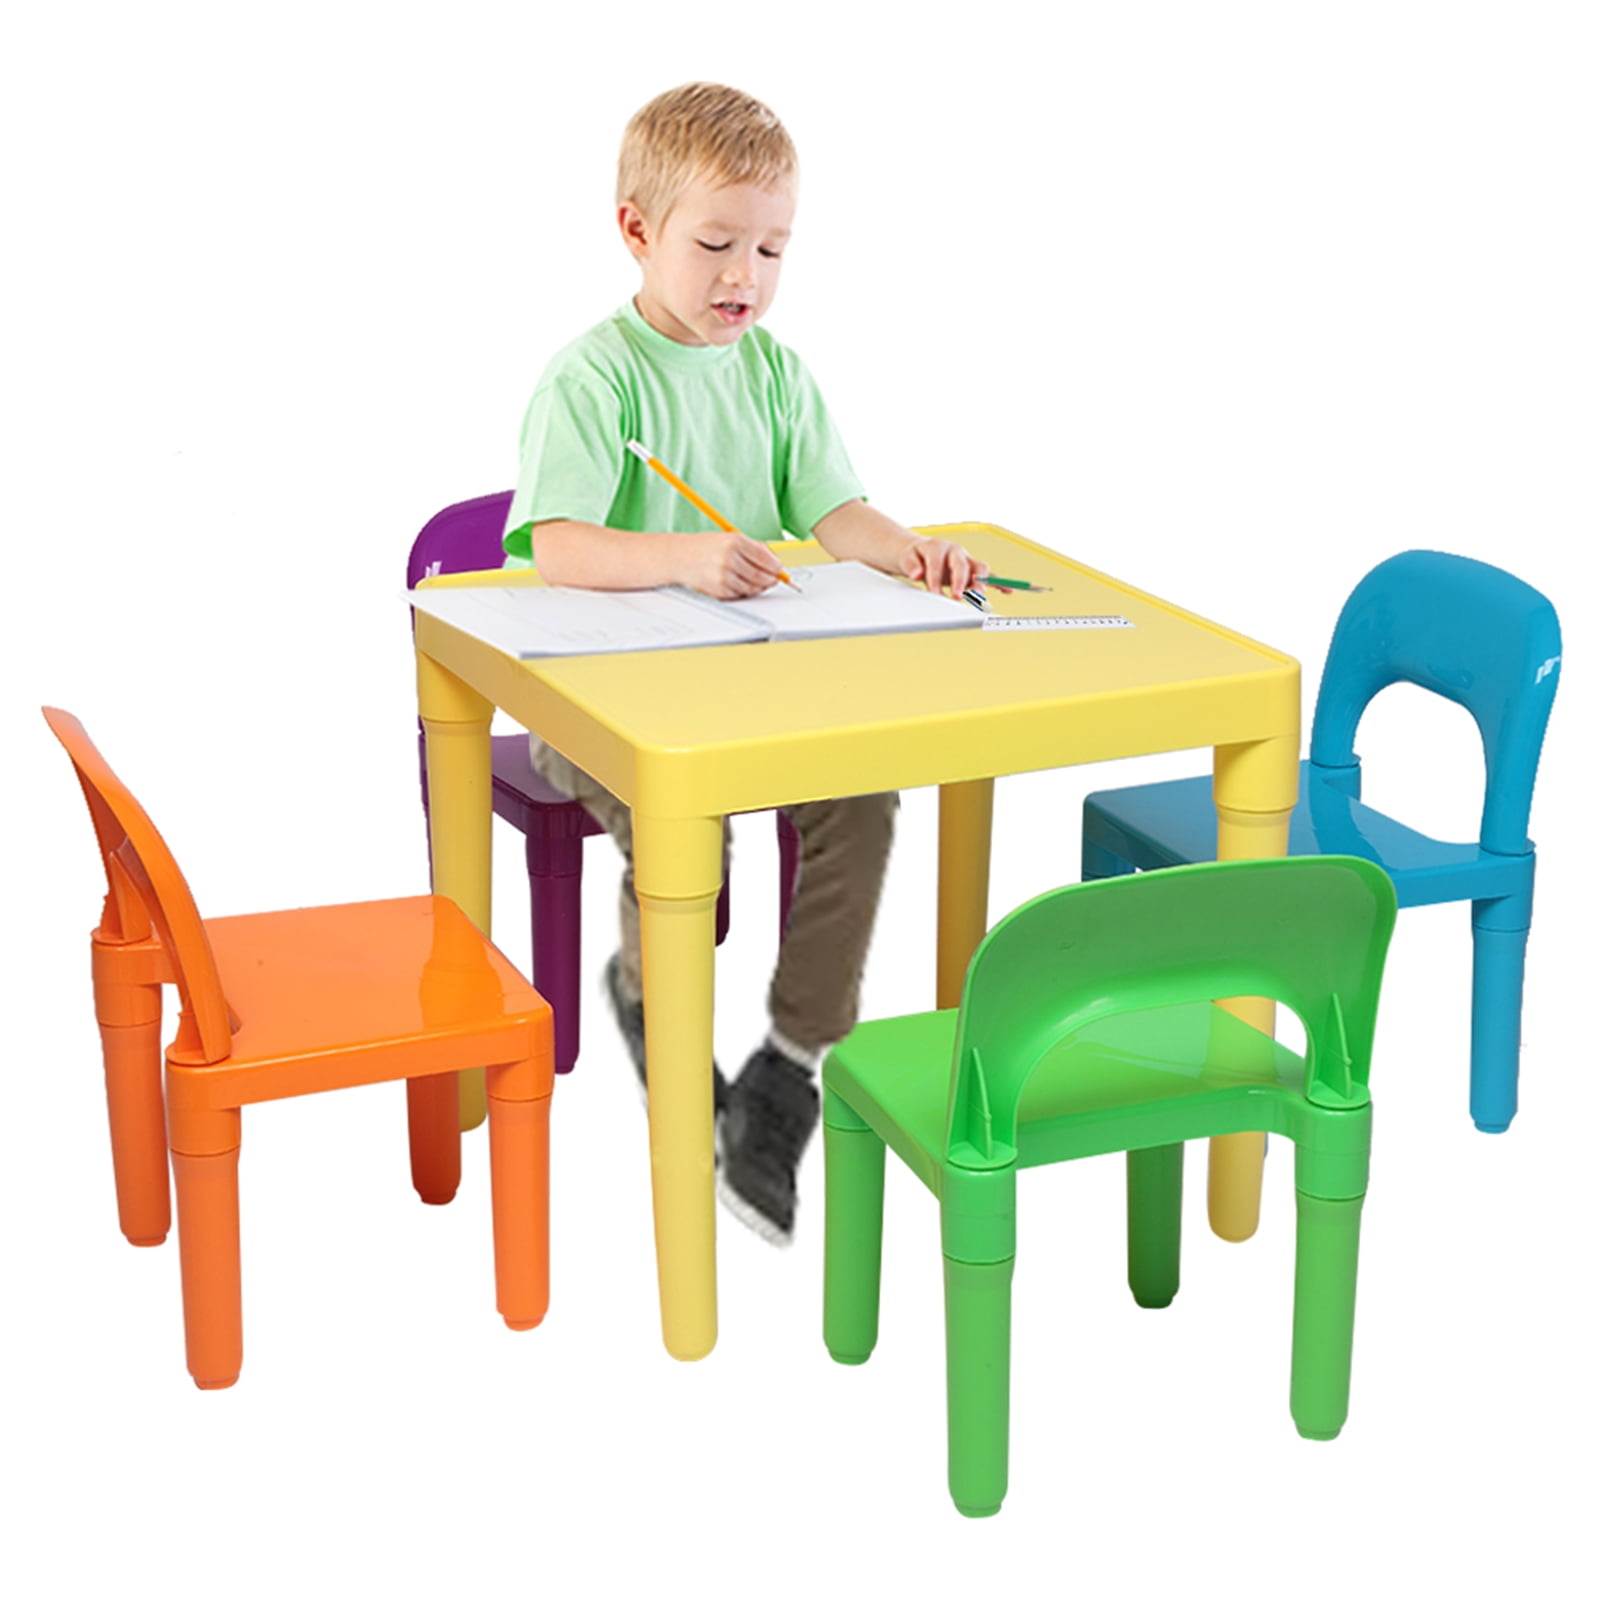 Den Haven Kids Table and Chairs Play Set Colorful Child Toy ...